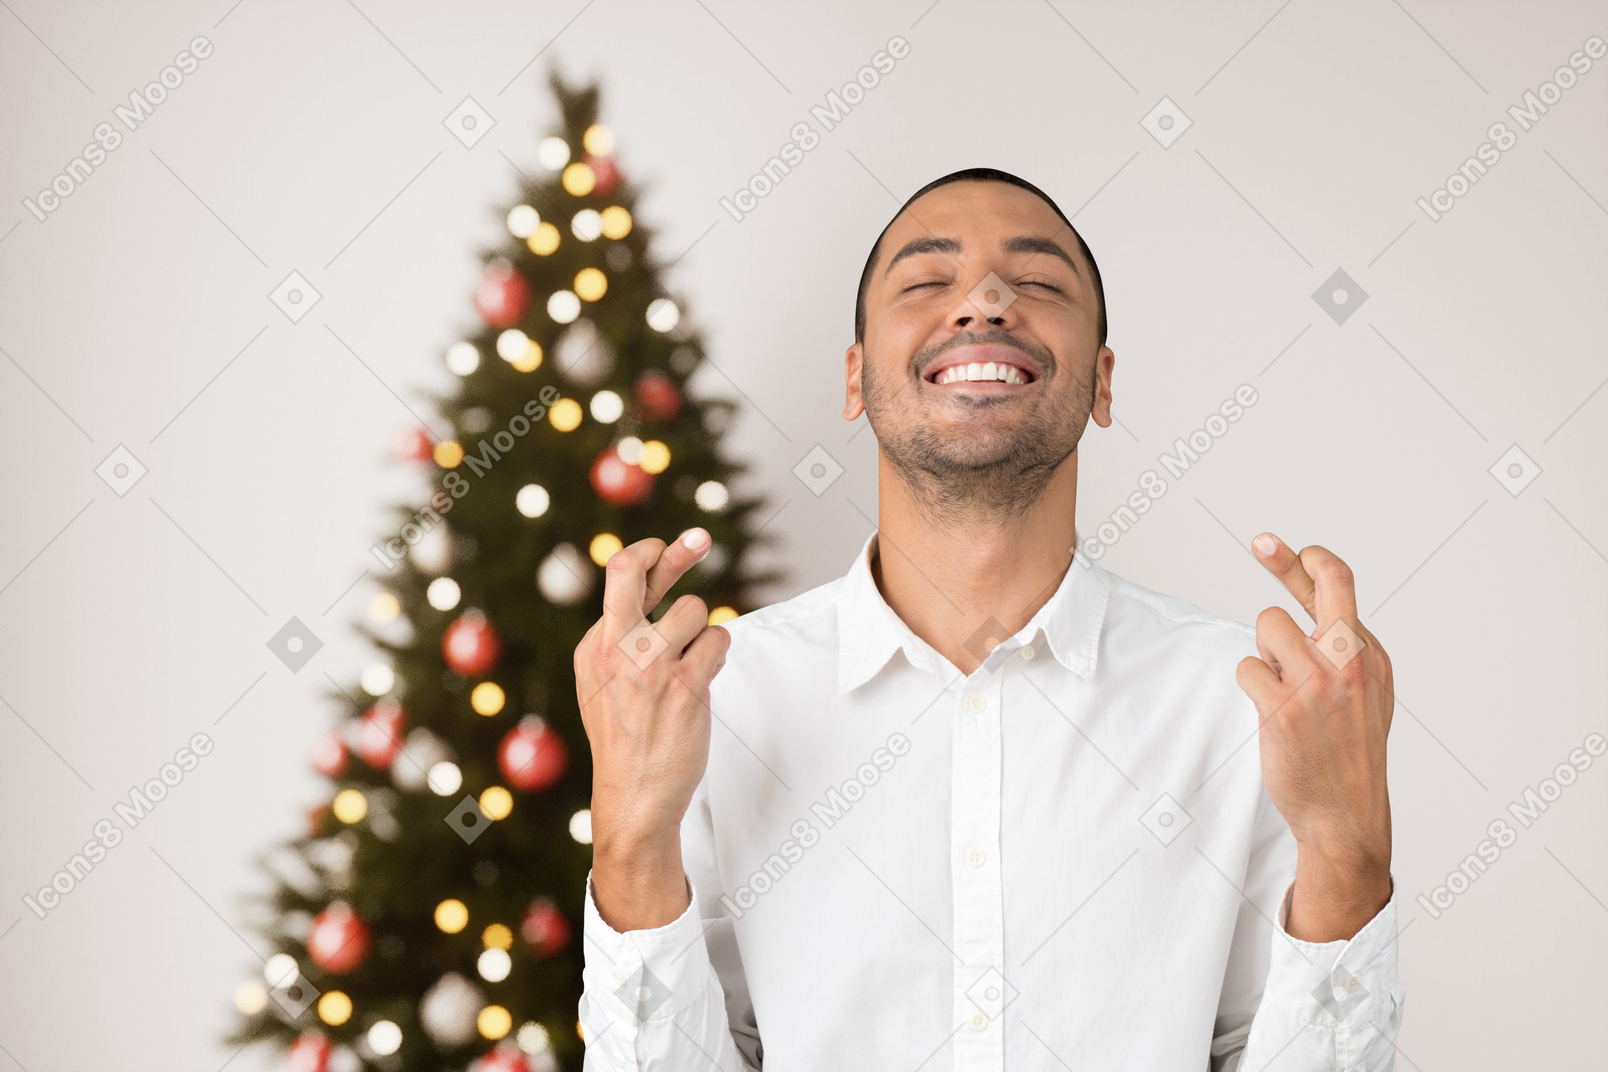 Young man wishing his dreams come true at christmas